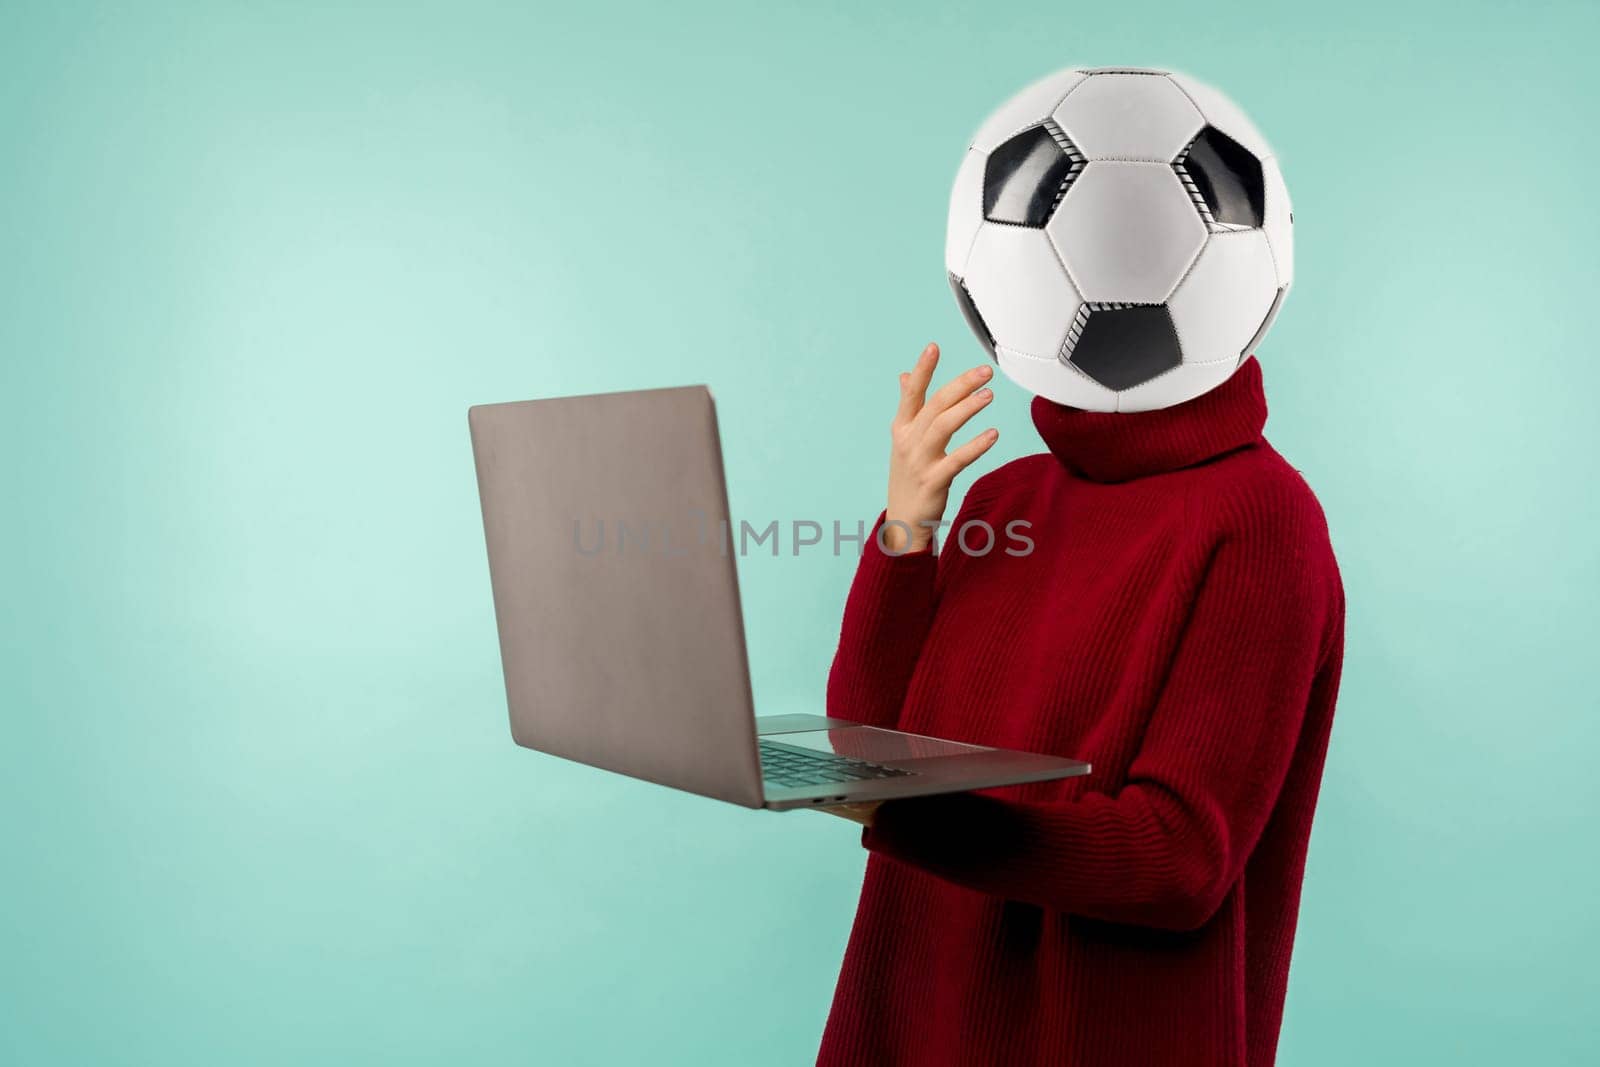 Abstract modern collage. woman soccer ball instead of a head in sweater looking laptop computer screen over blue background by zartarn